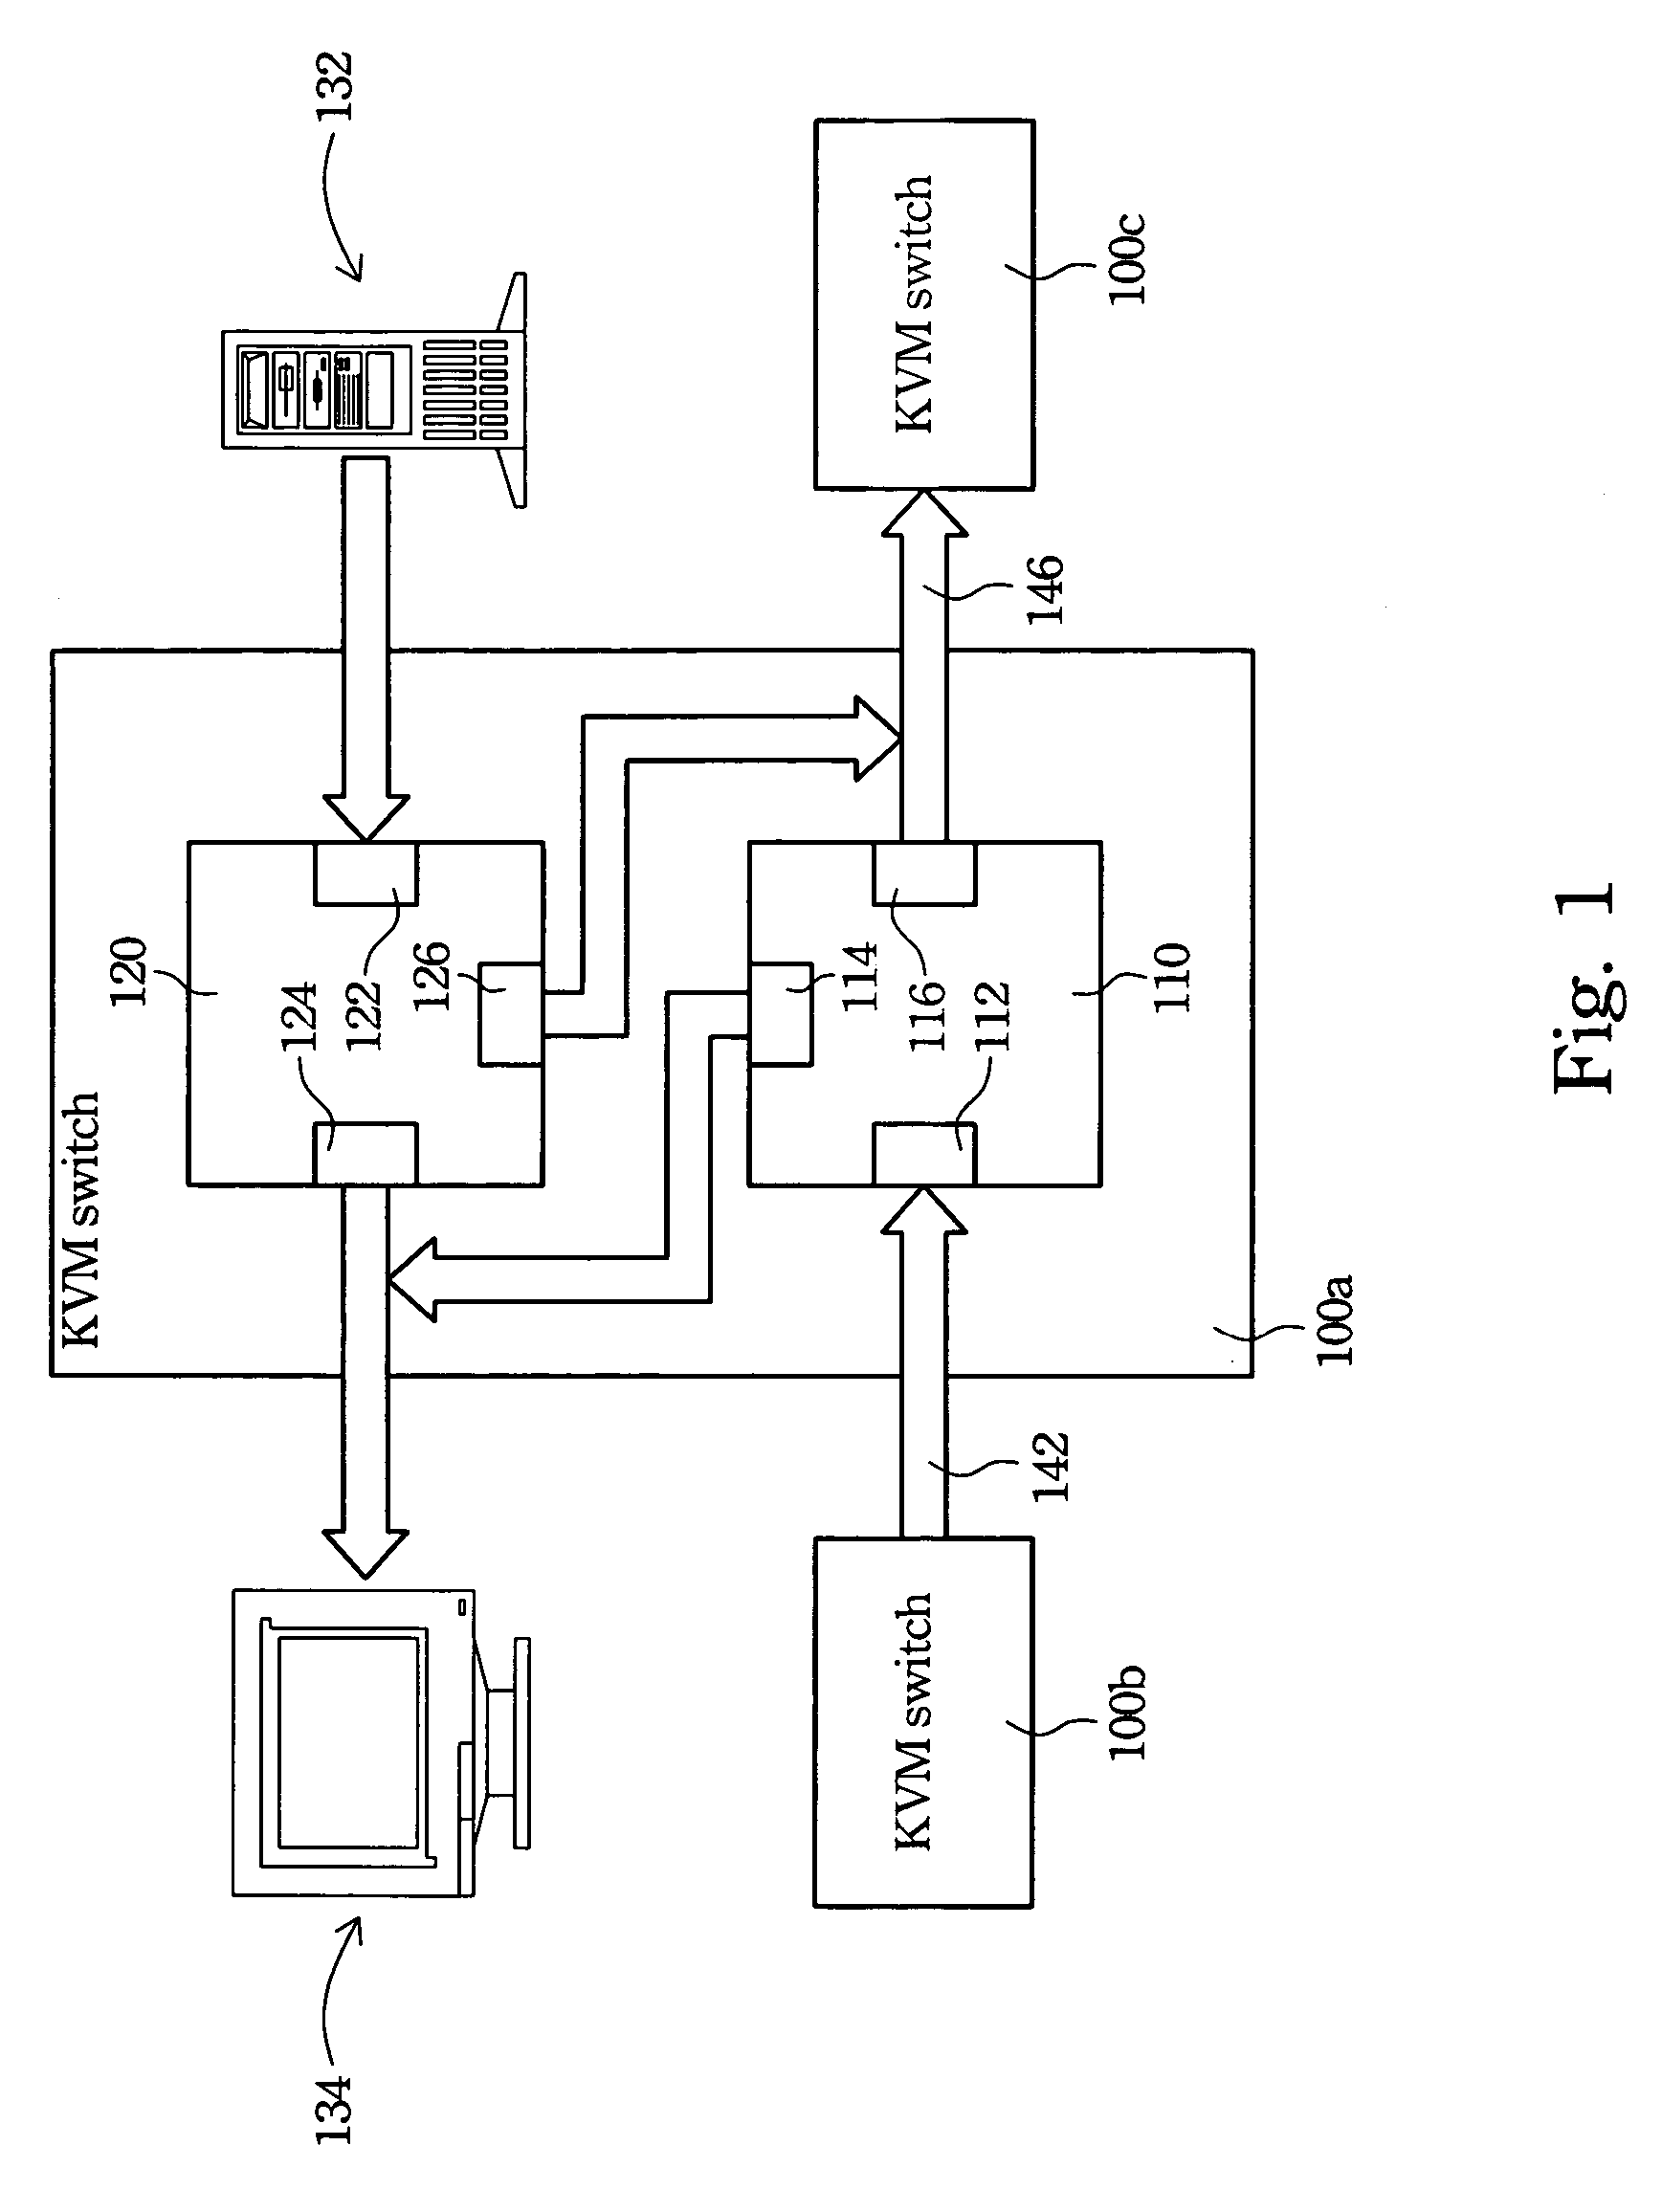 Keyboard video mouse switch for multiple chaining and a method for switching electrical signals thereof